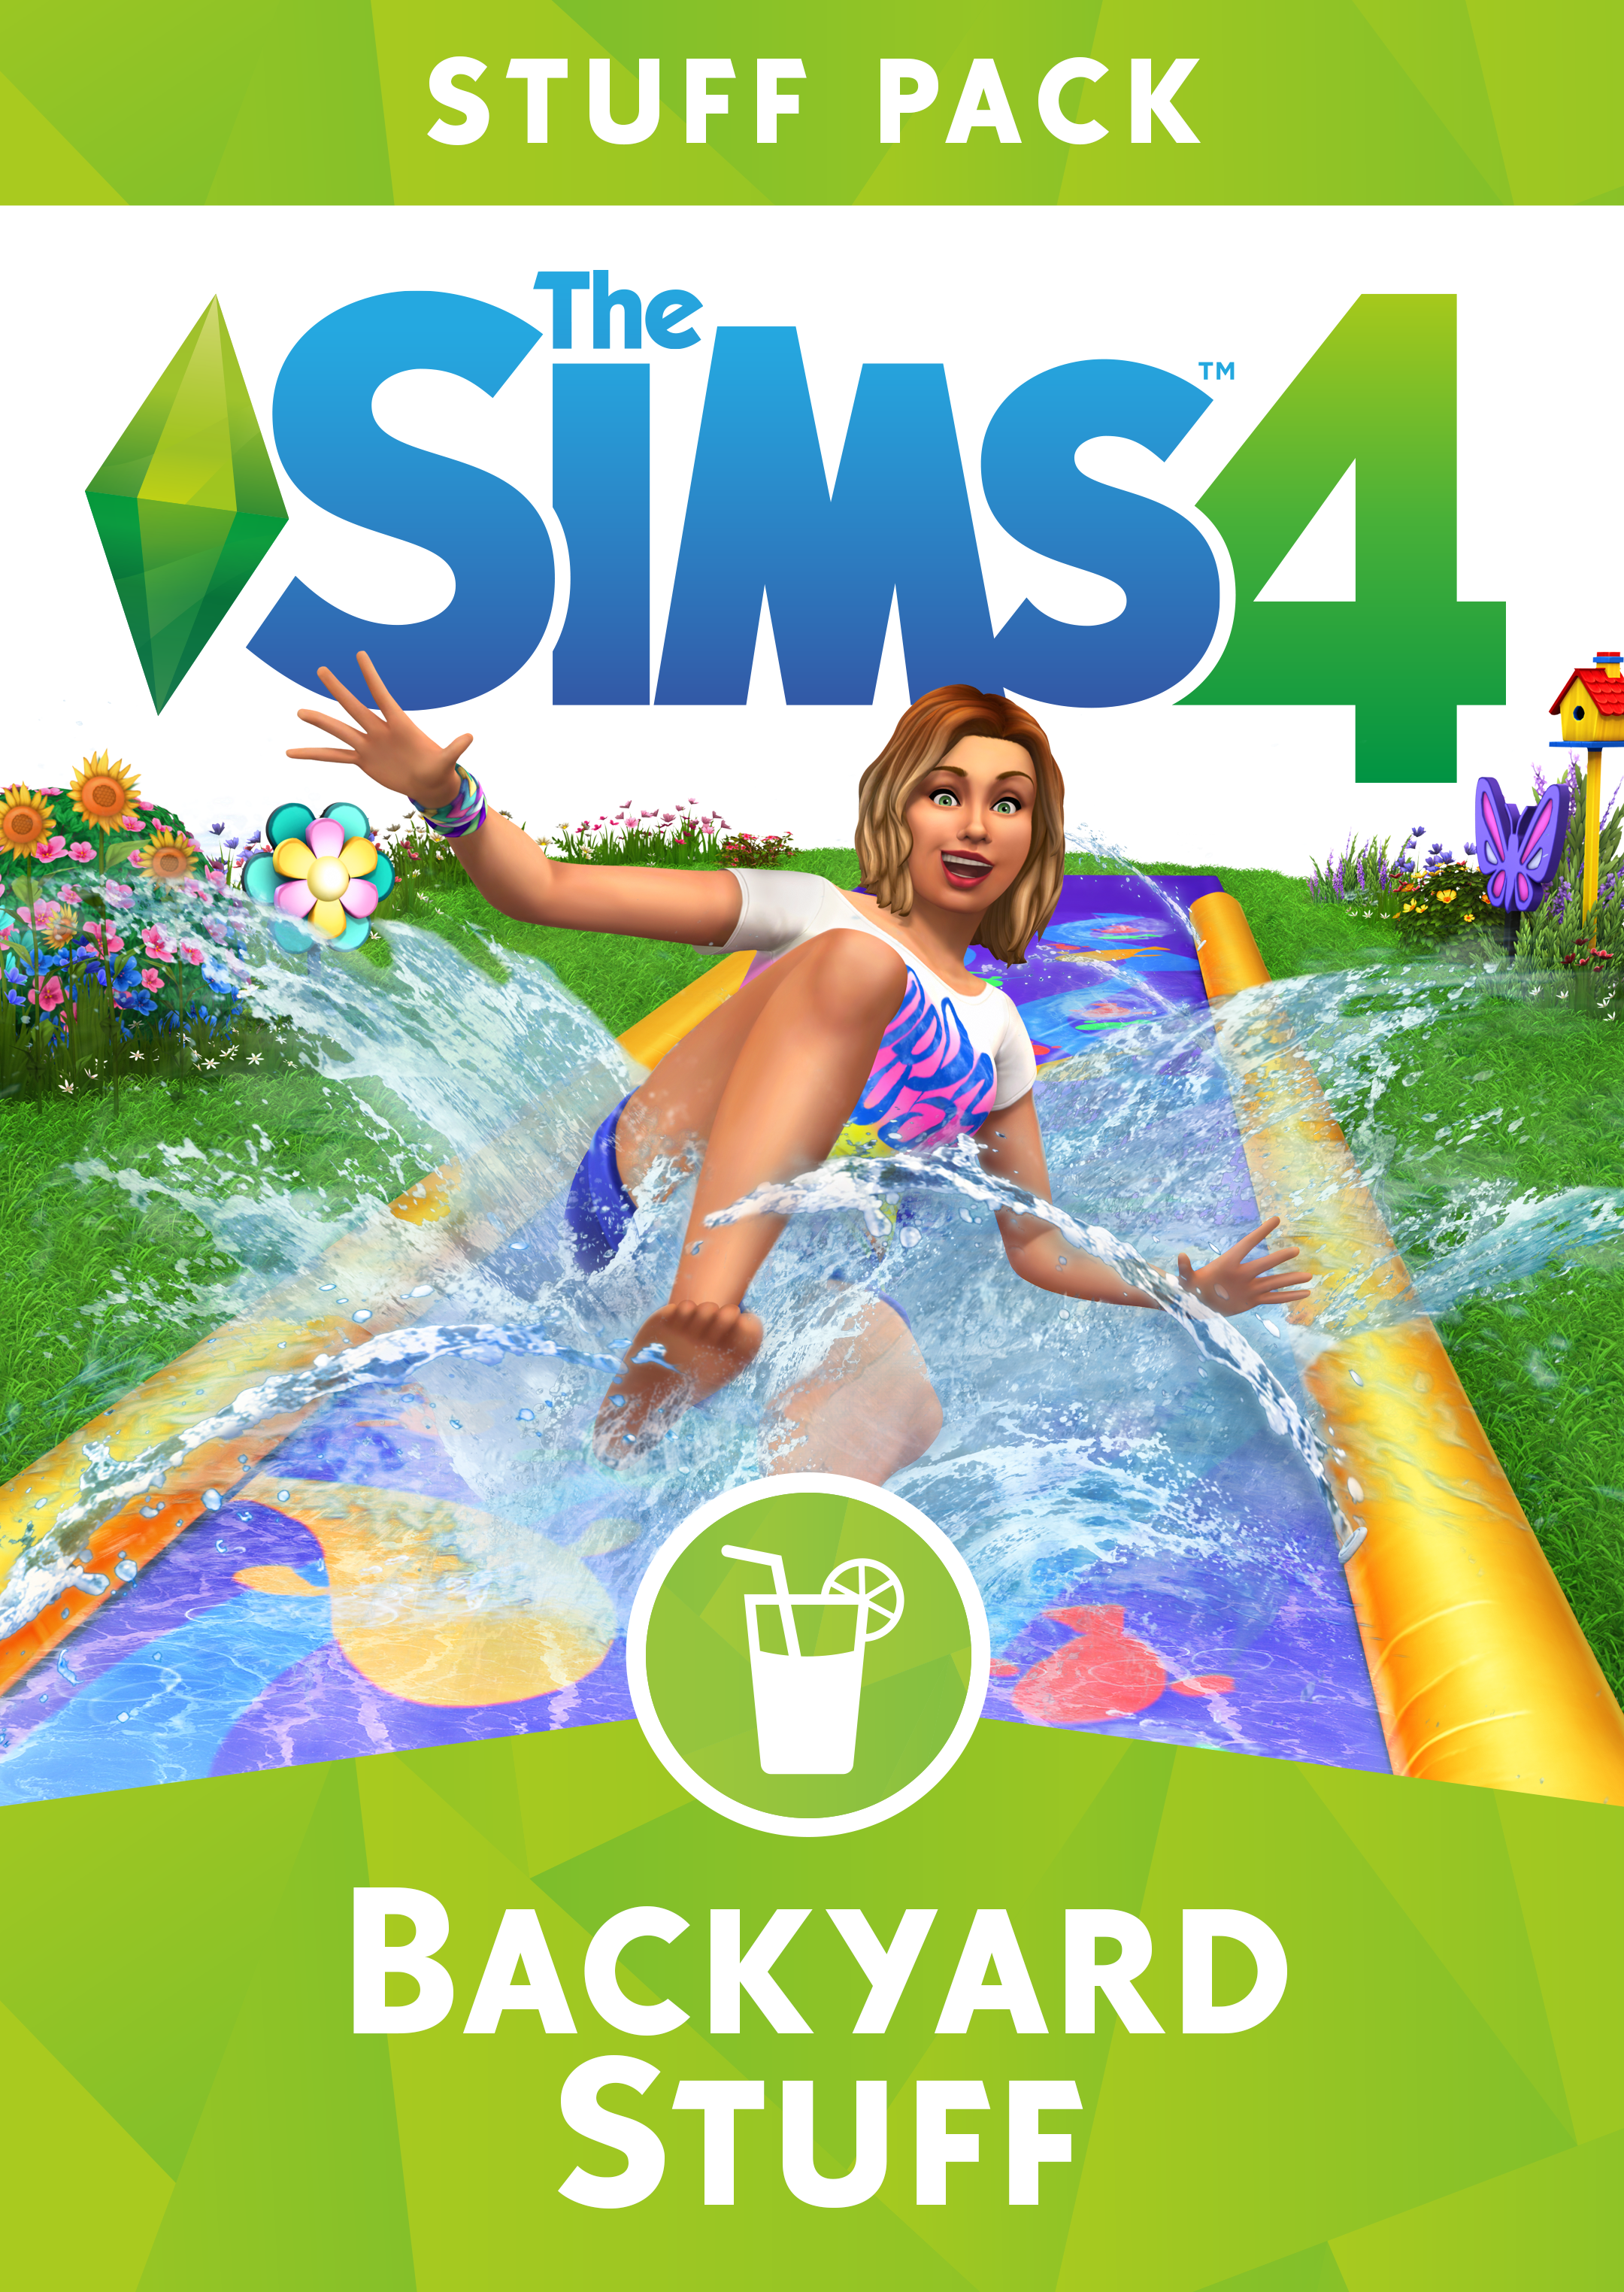 sims 4 all expansion packs download free 2019